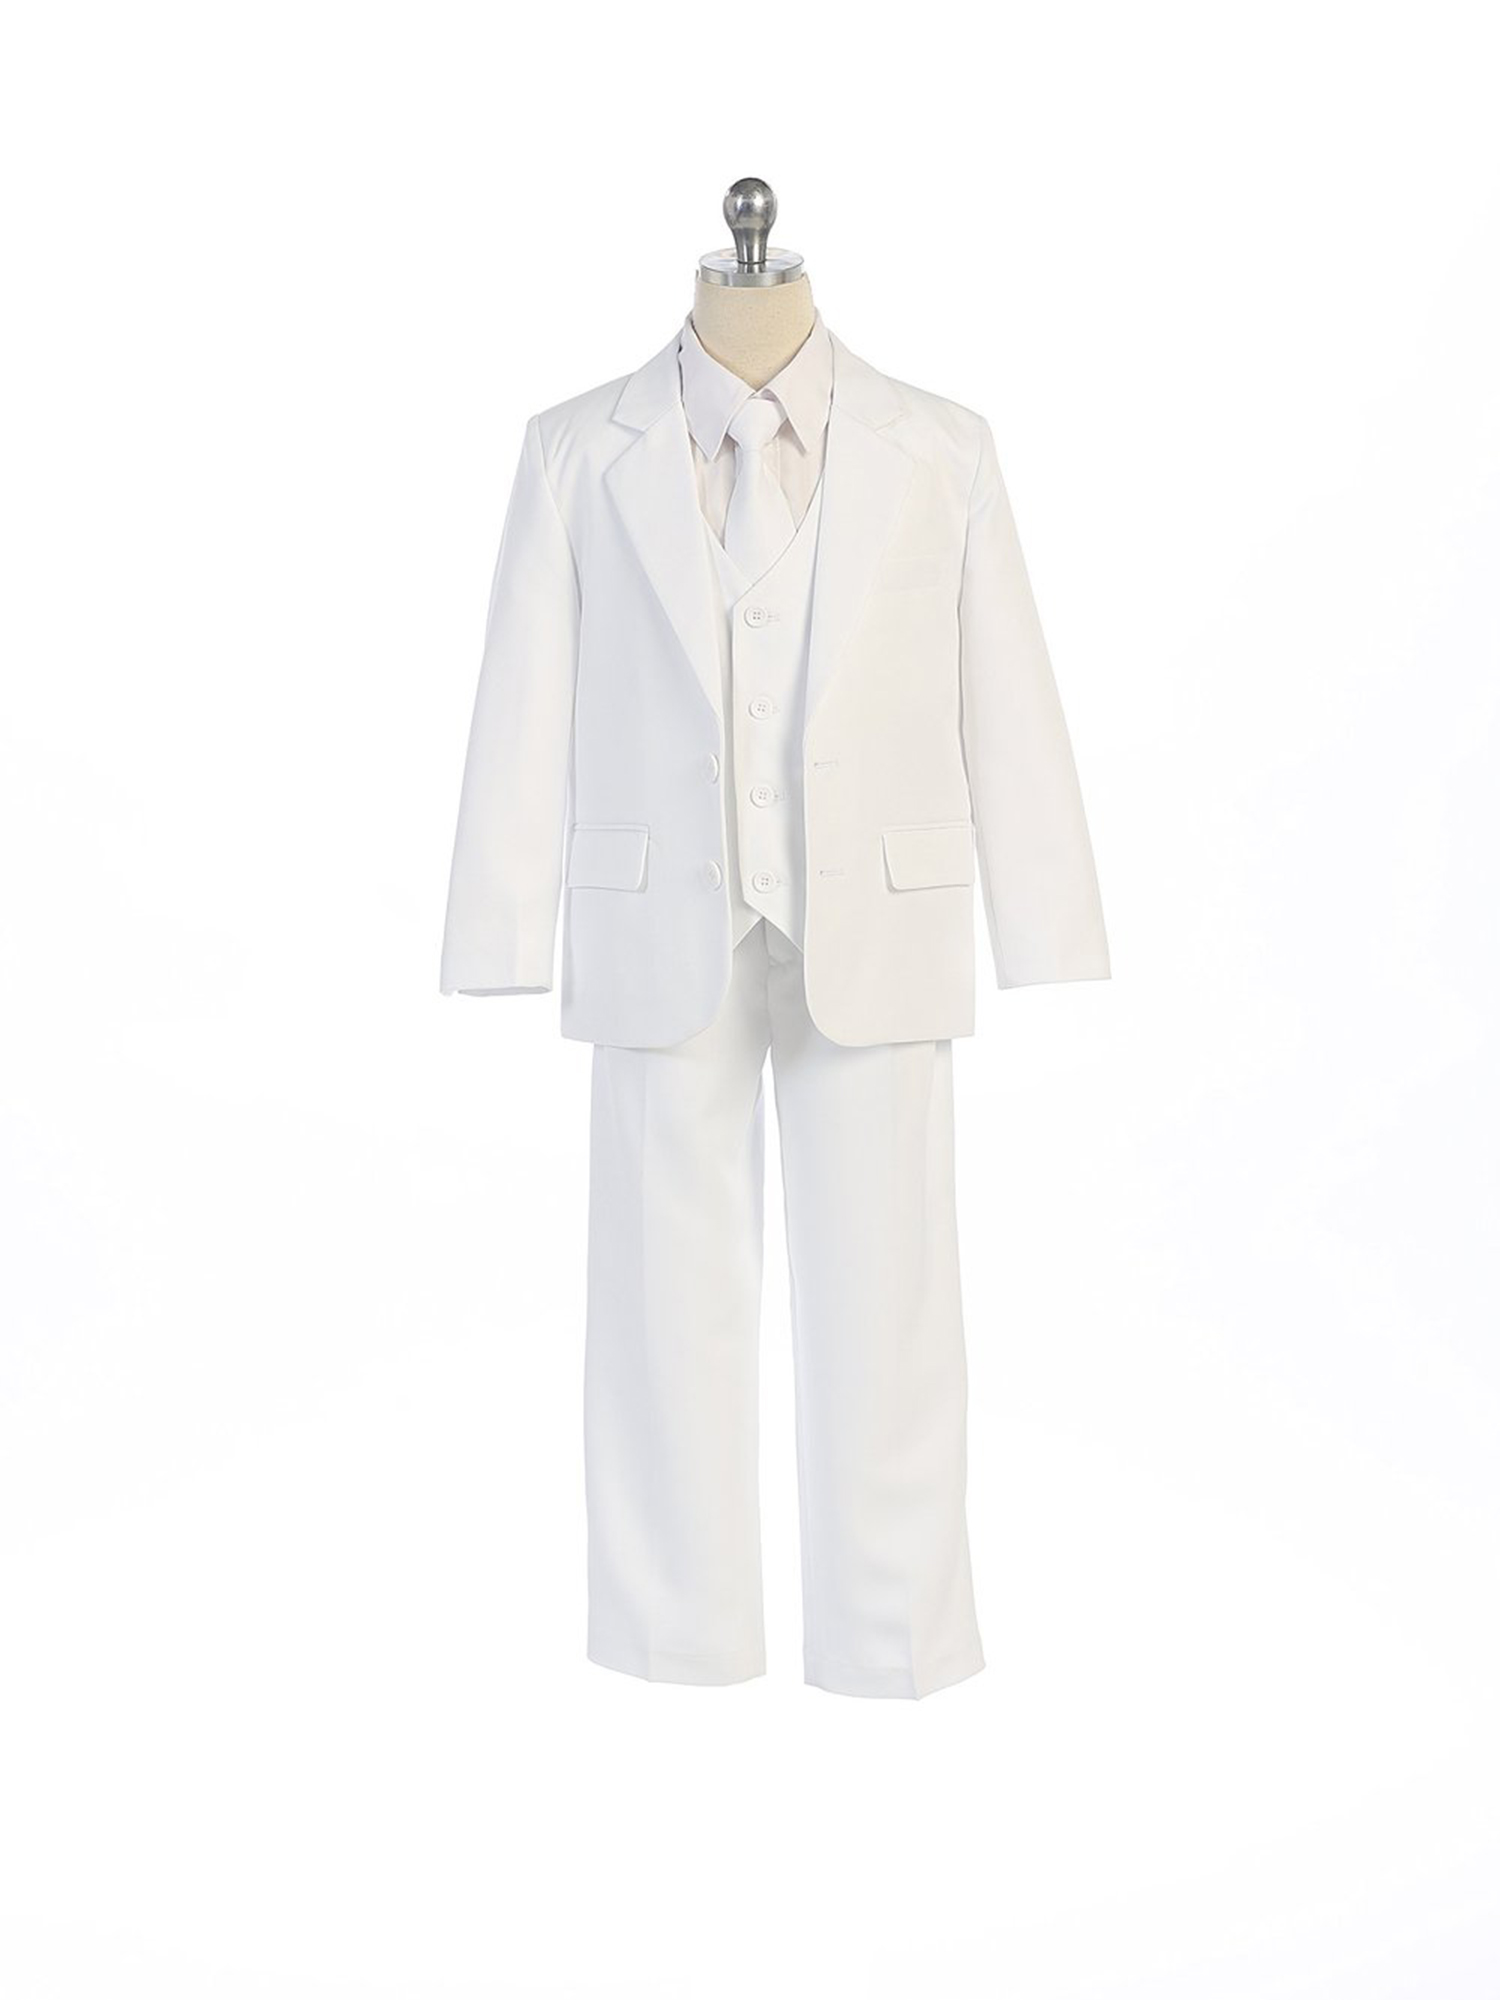 COLE Boys Suit with Shirt and Vest (5-Piece) - White - Size 1